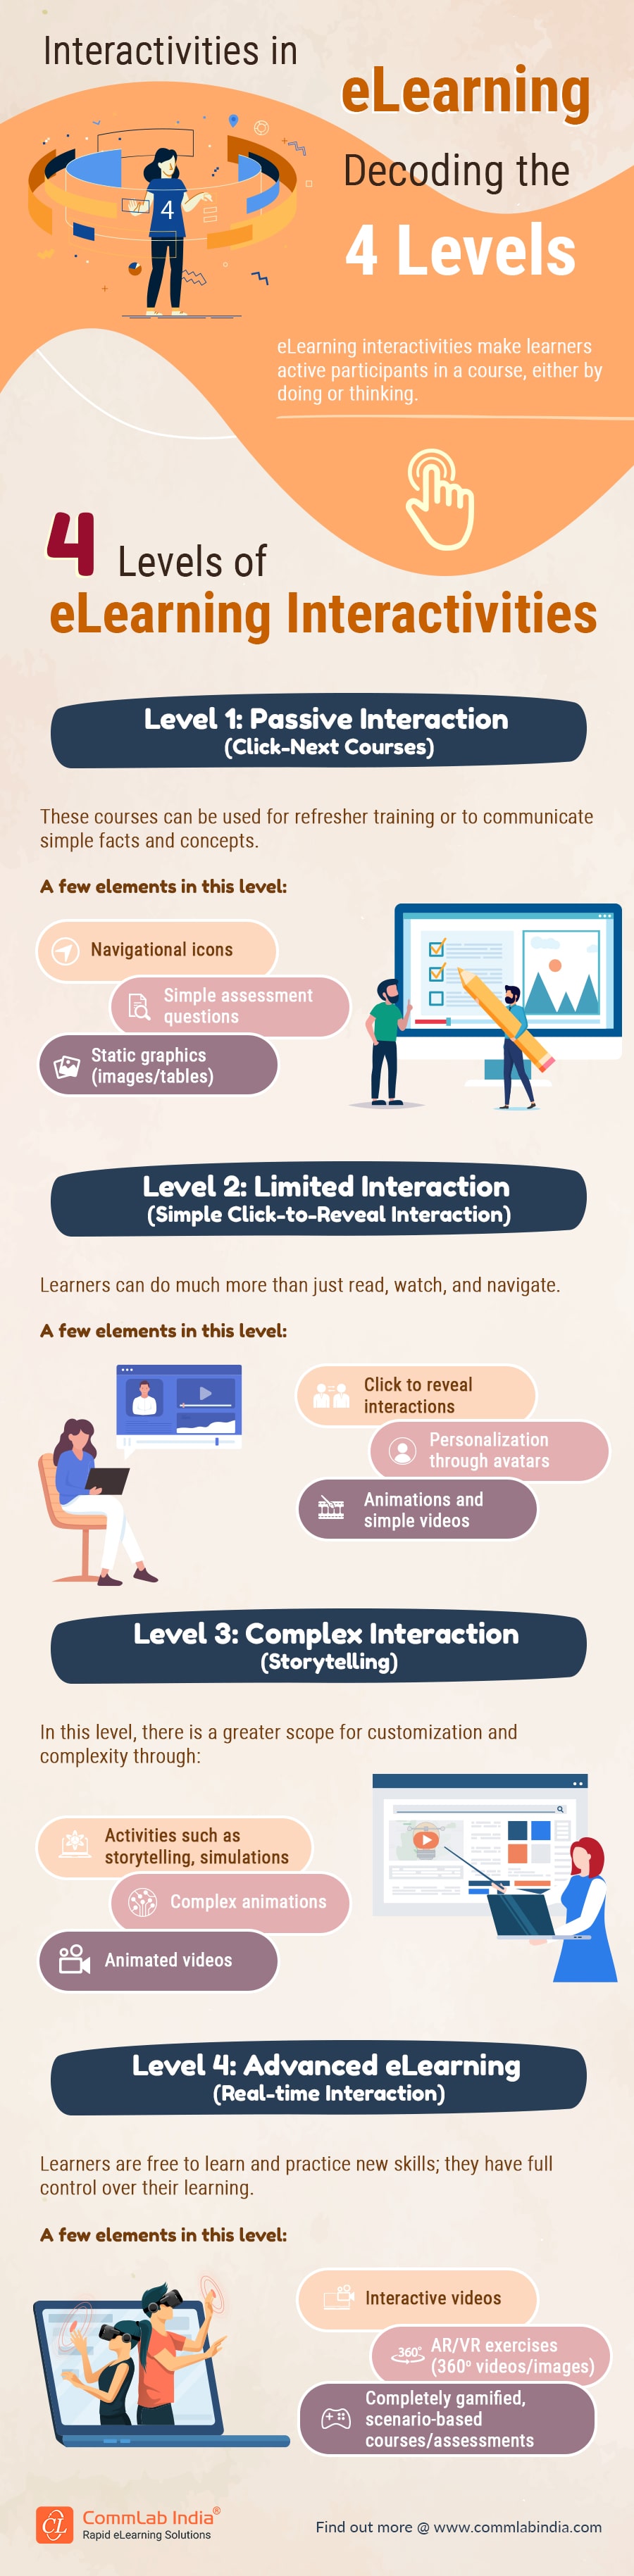 eLearning Interactivities and the 4 Levels with Examples!